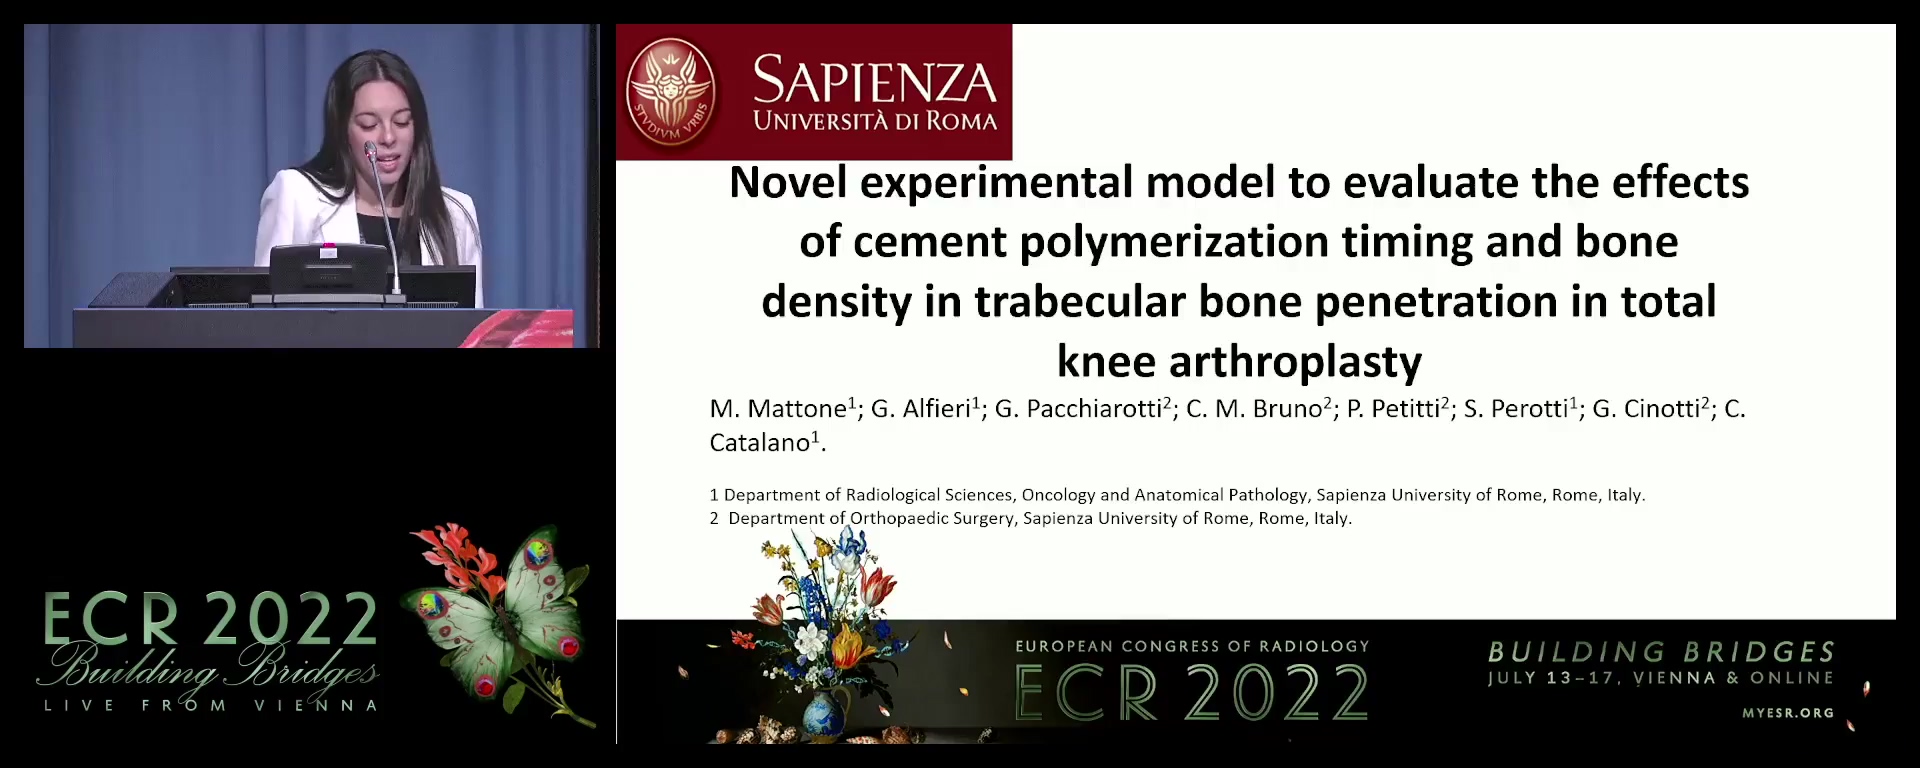 Novel experimental model to evaluate the effects of cement polymerization timing and bone density in trabecular bone penetration in total knee arthroplasty - Monica Mattone, Rome / IT